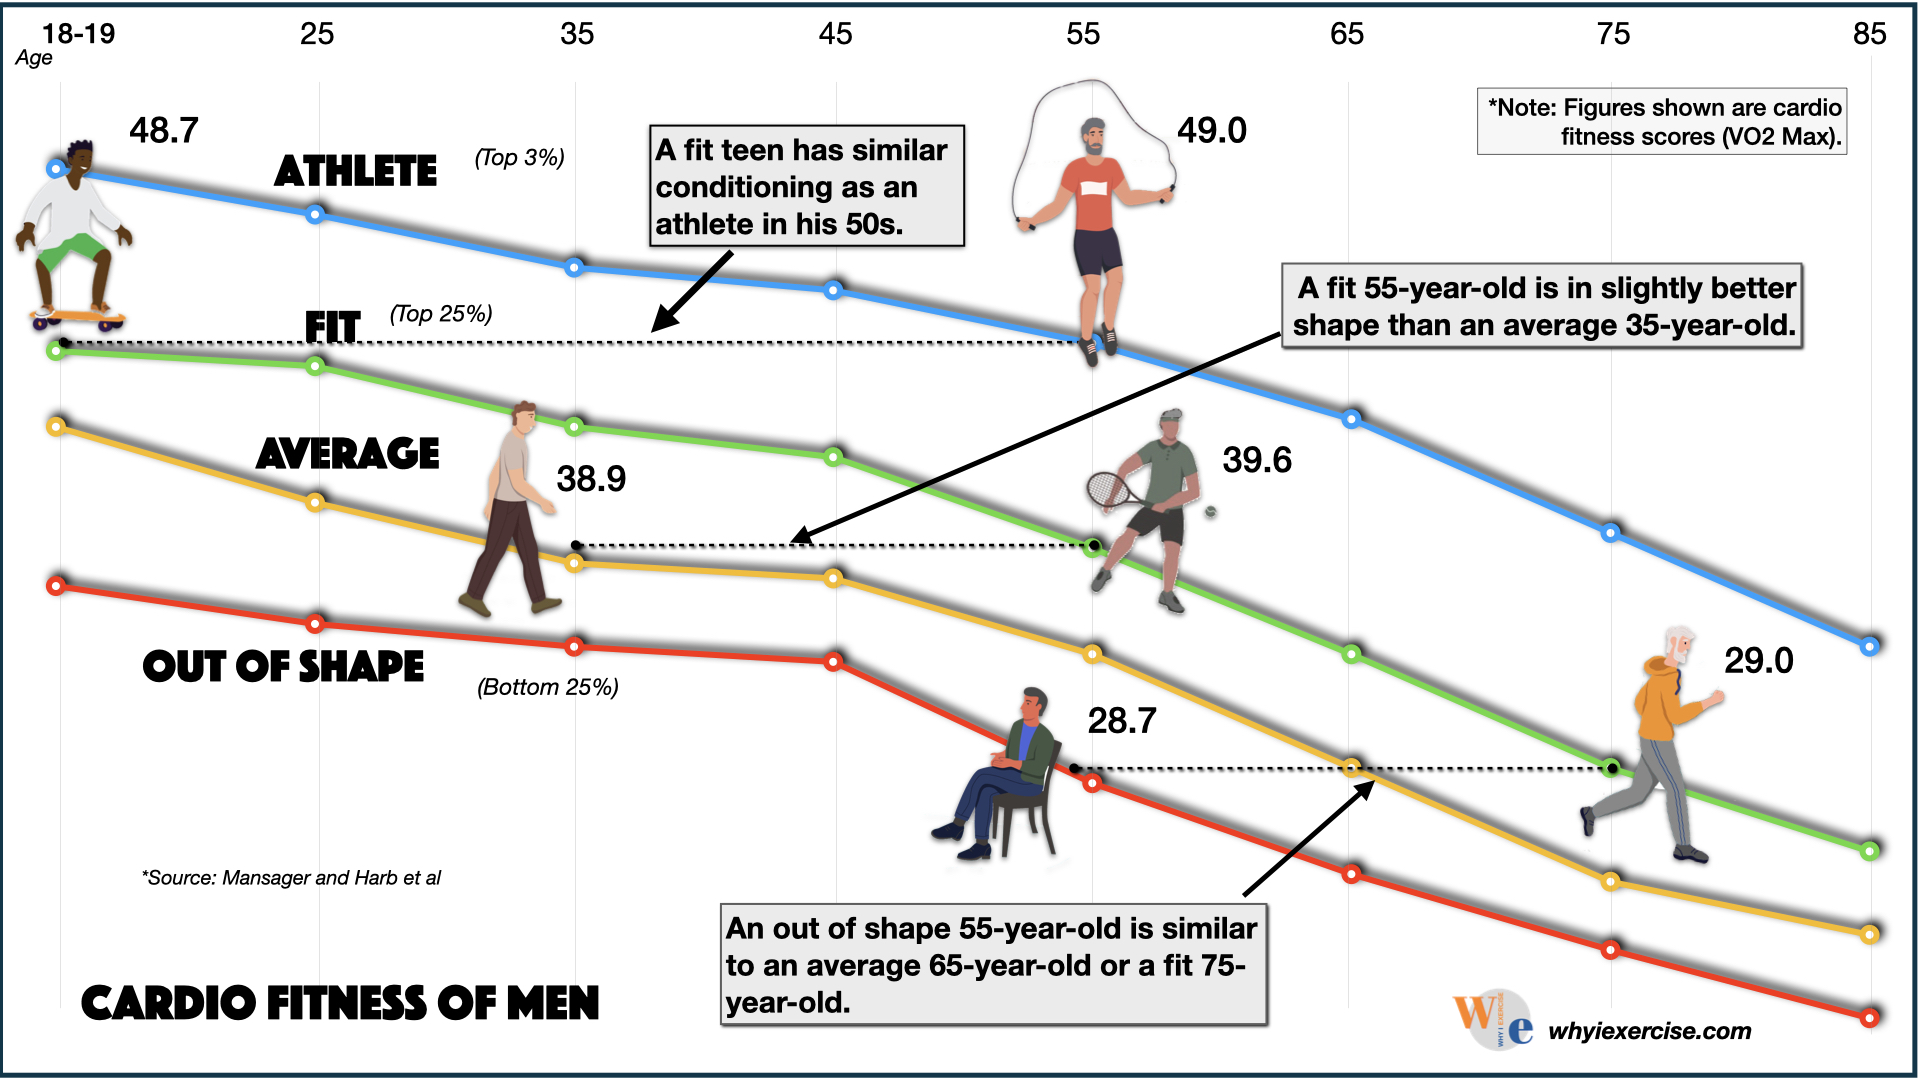 cardio fitness comparison in men, fit vs. out of shape, ages 17 to 85